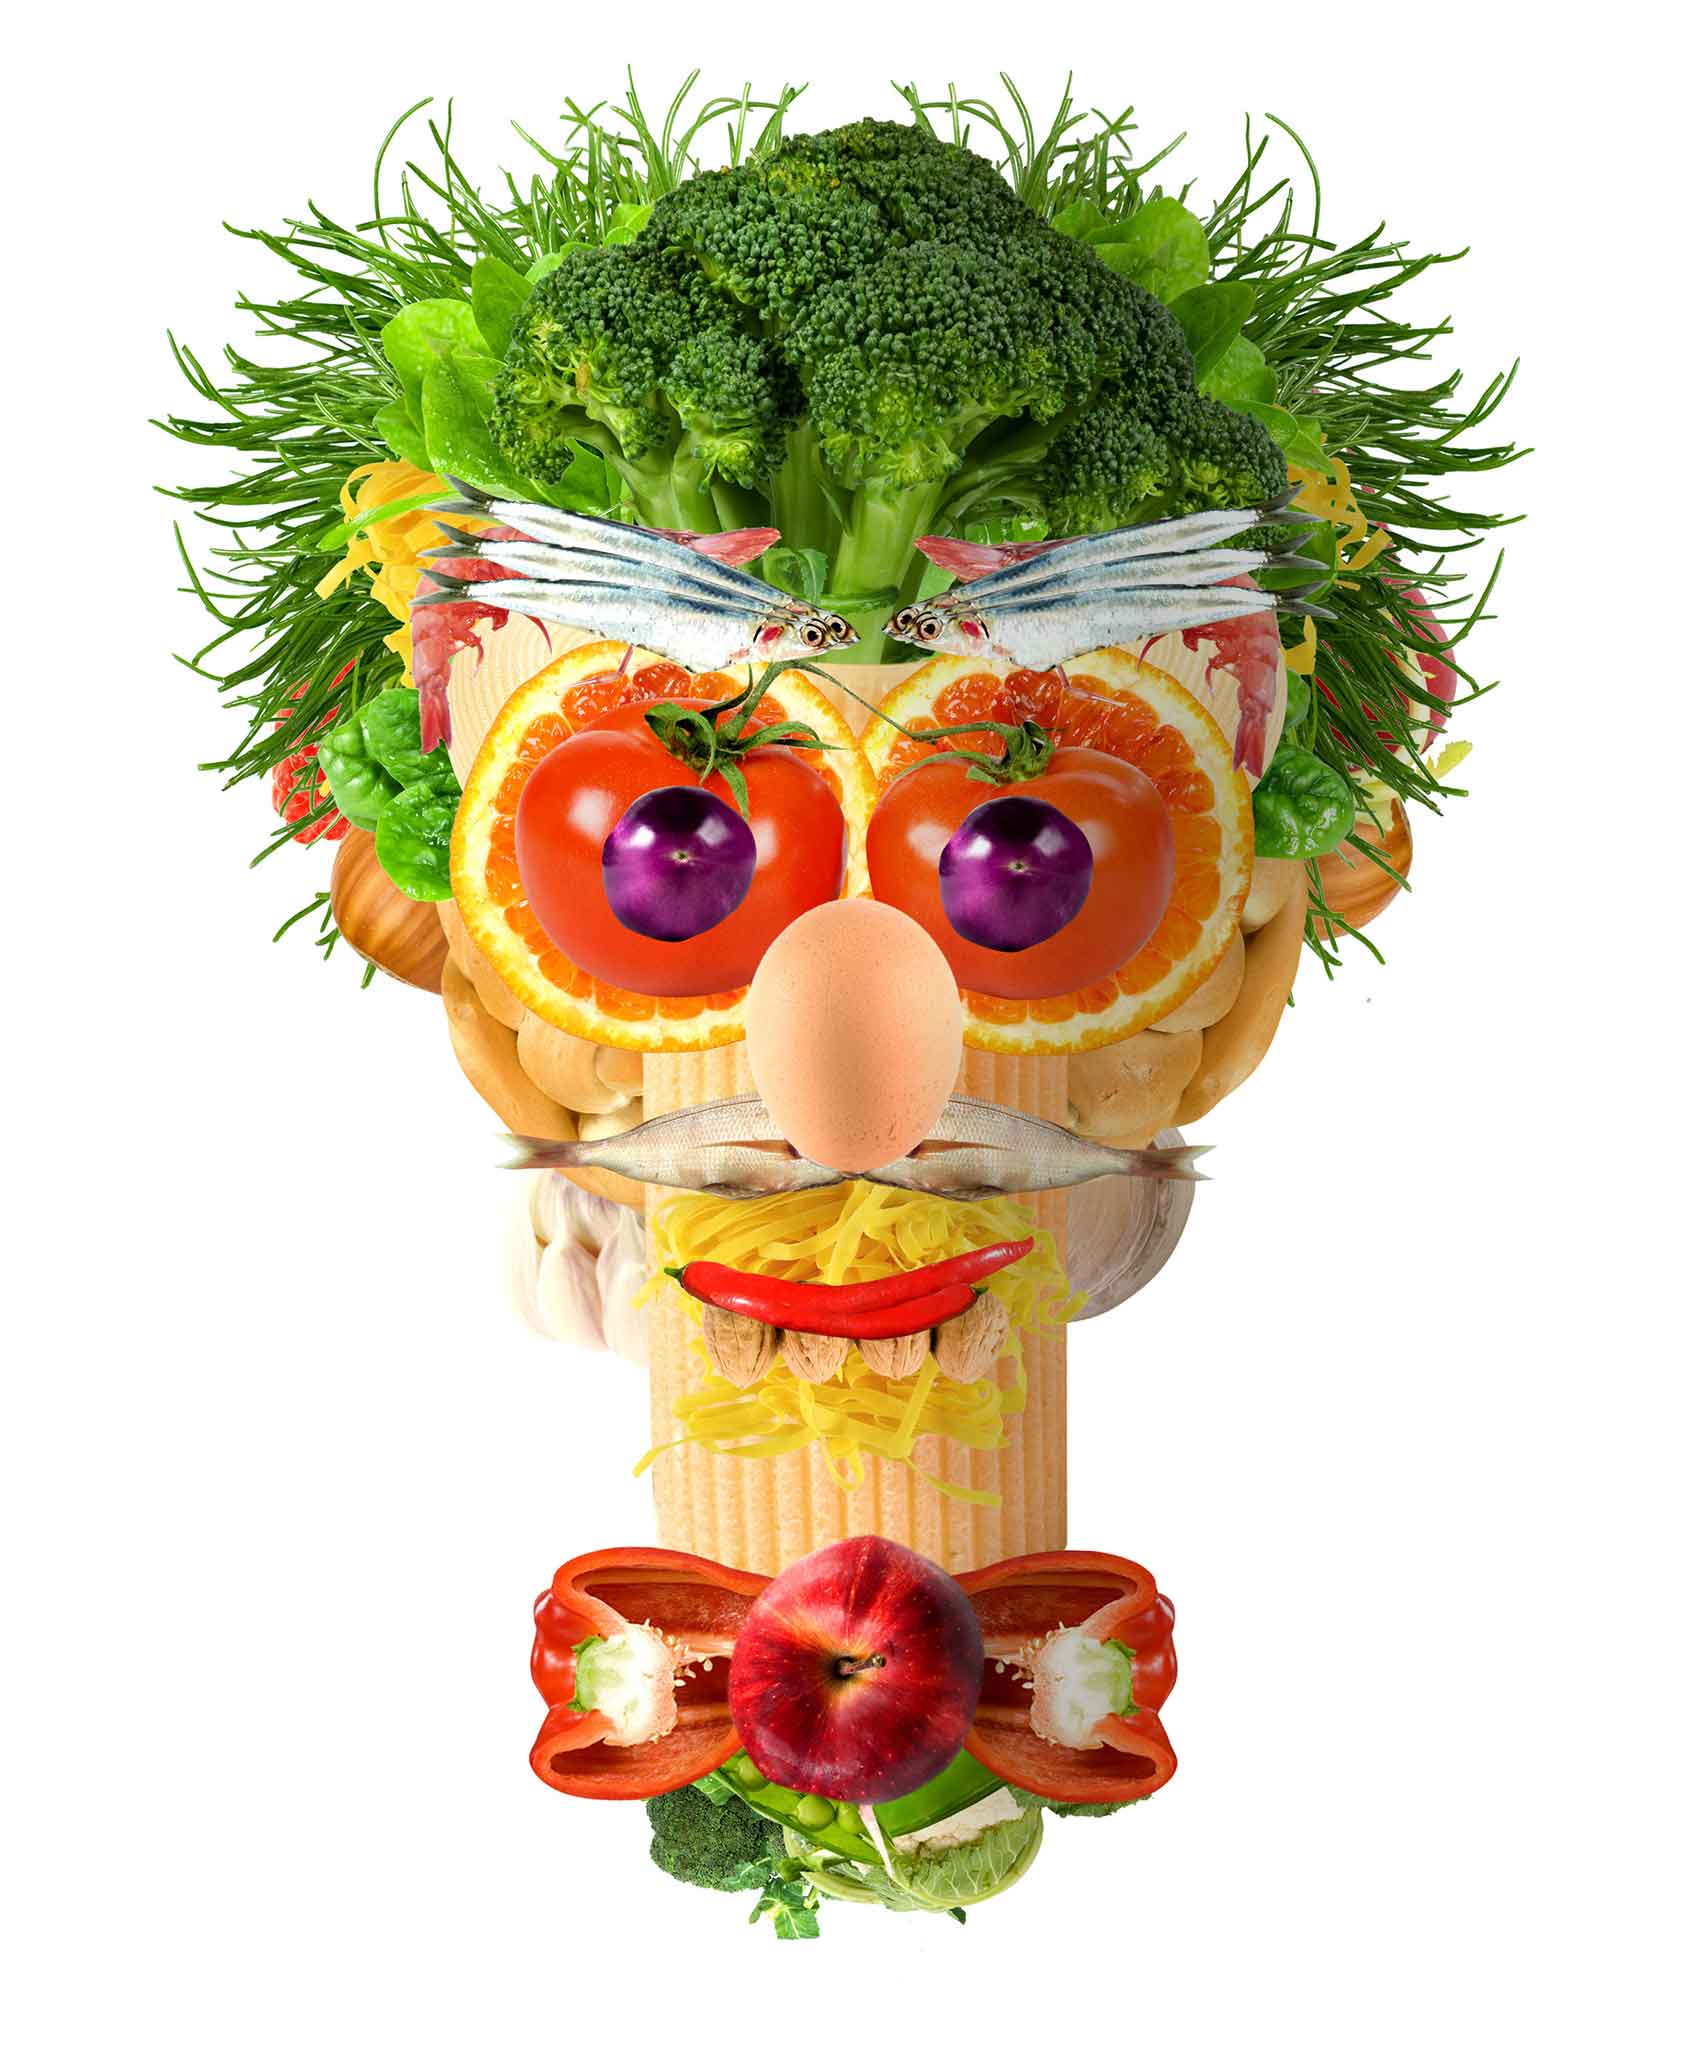 A humorous face made from various fruit and vegetables.